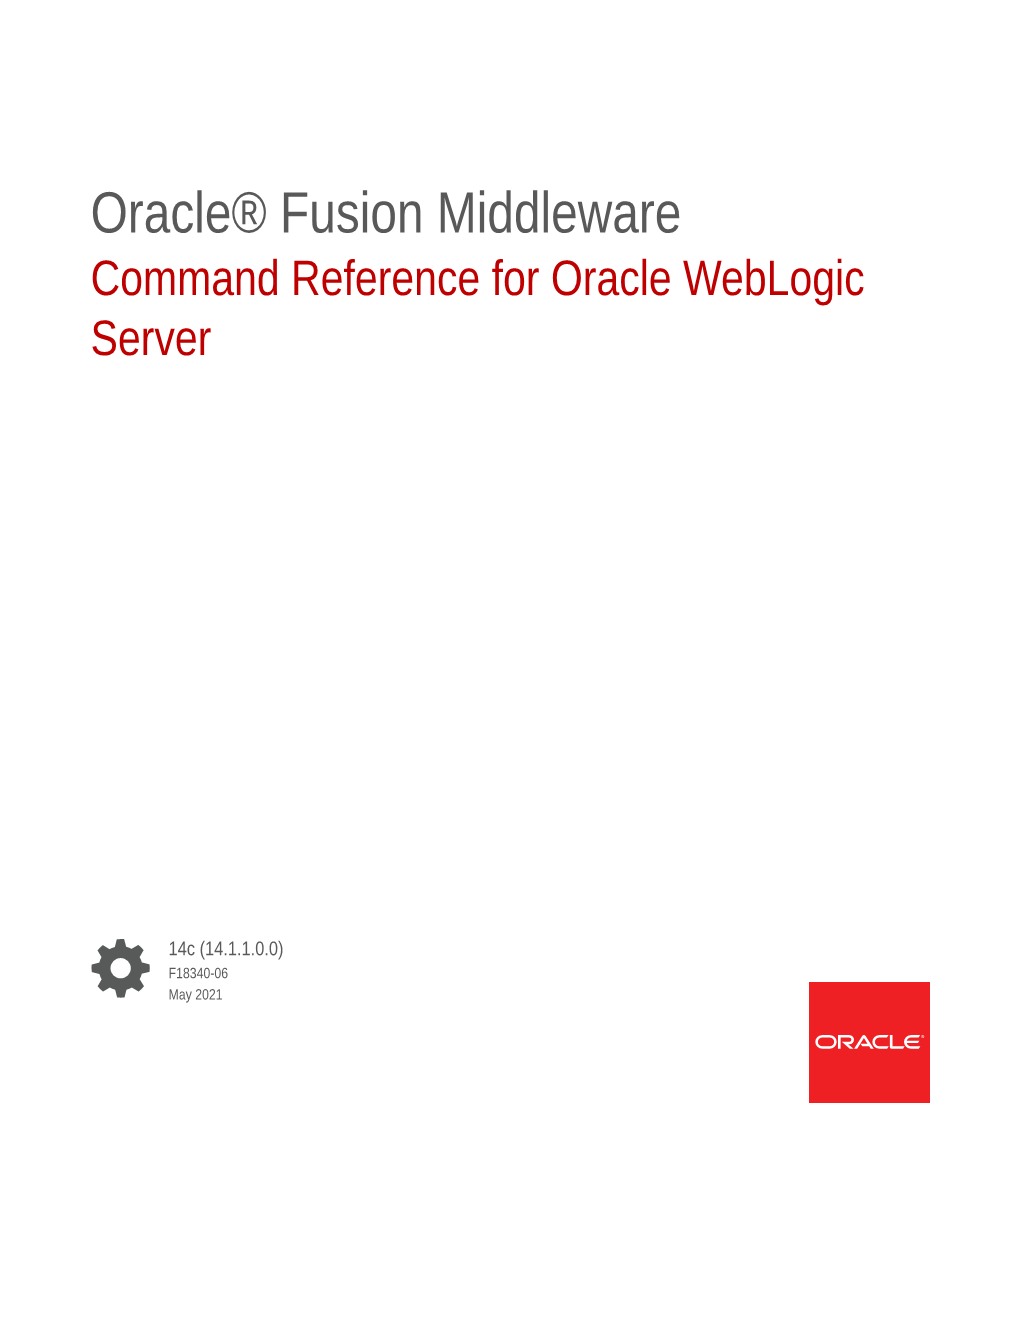 Command Reference for Oracle Weblogic Server